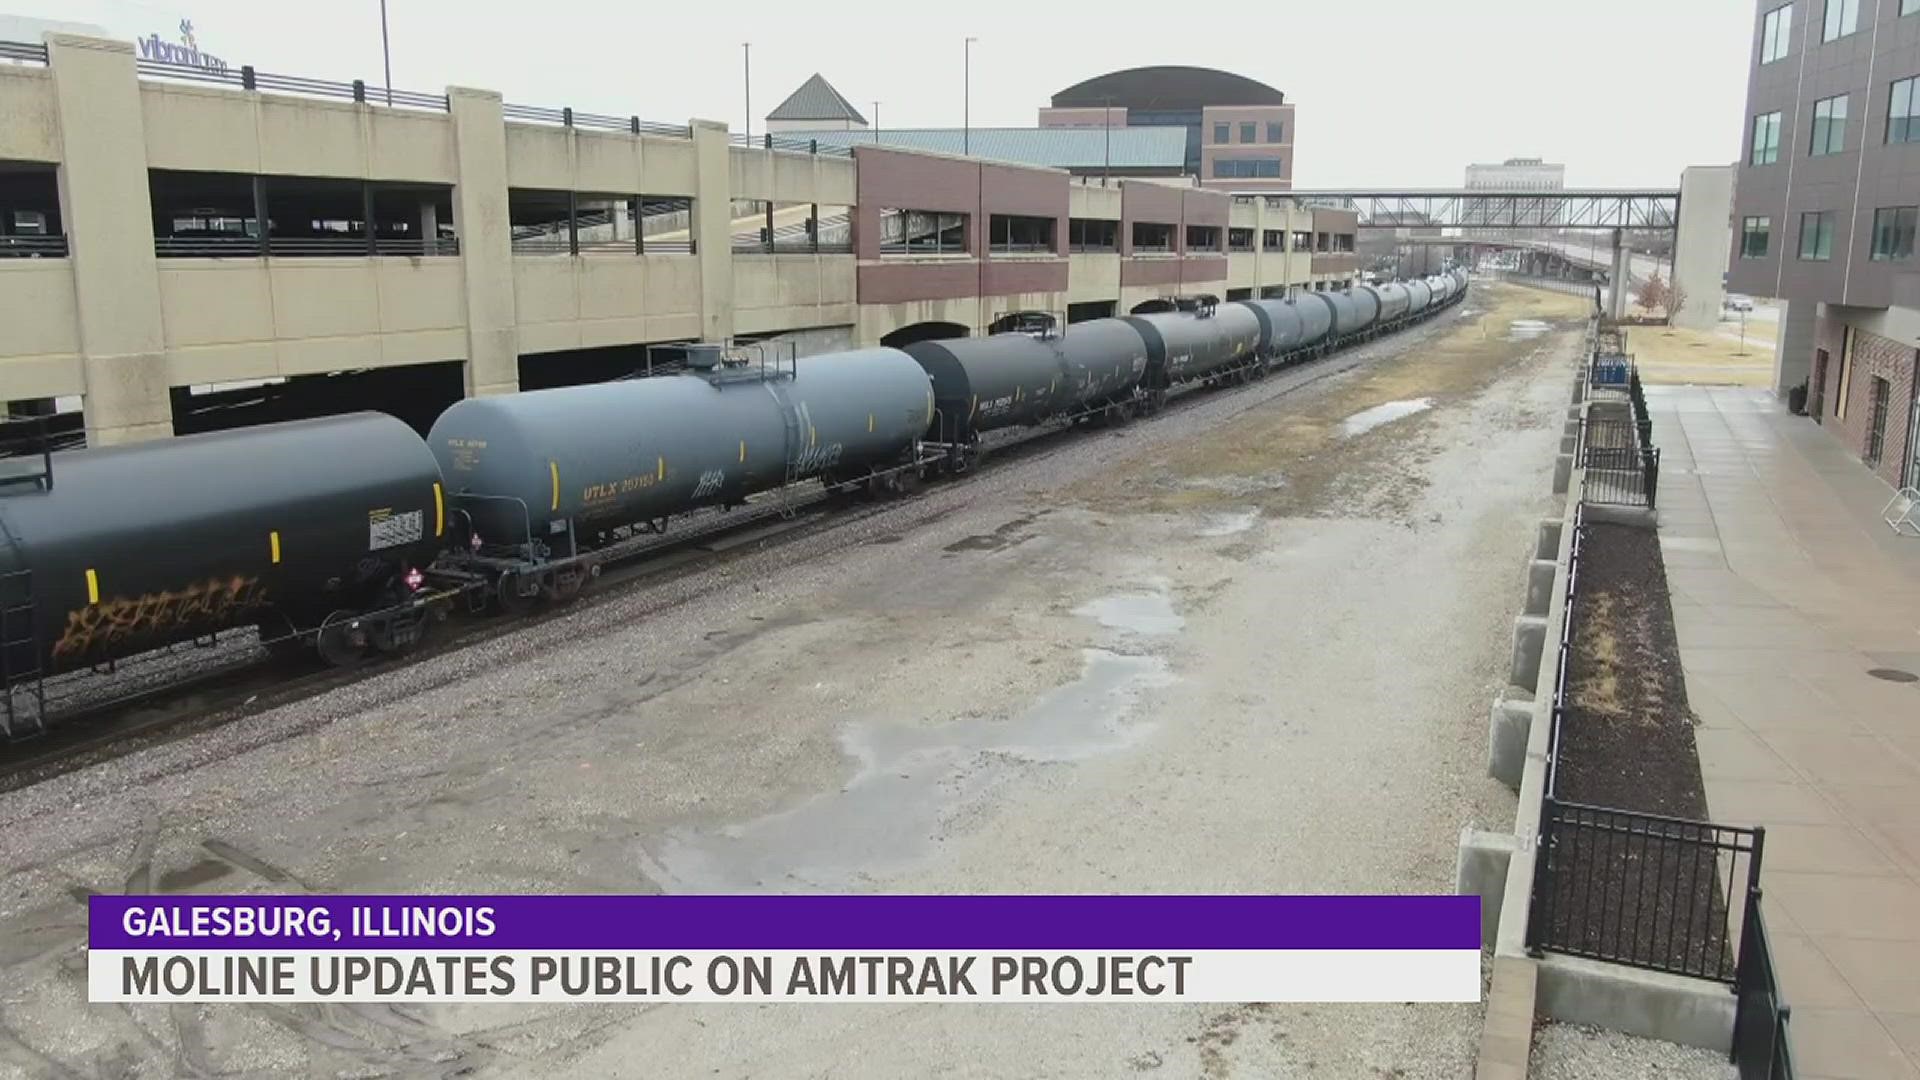 After over a decade of planning and millions of dollars in funding, Moline officials still support the Amtrak rail service project, despite remaining obstacles.